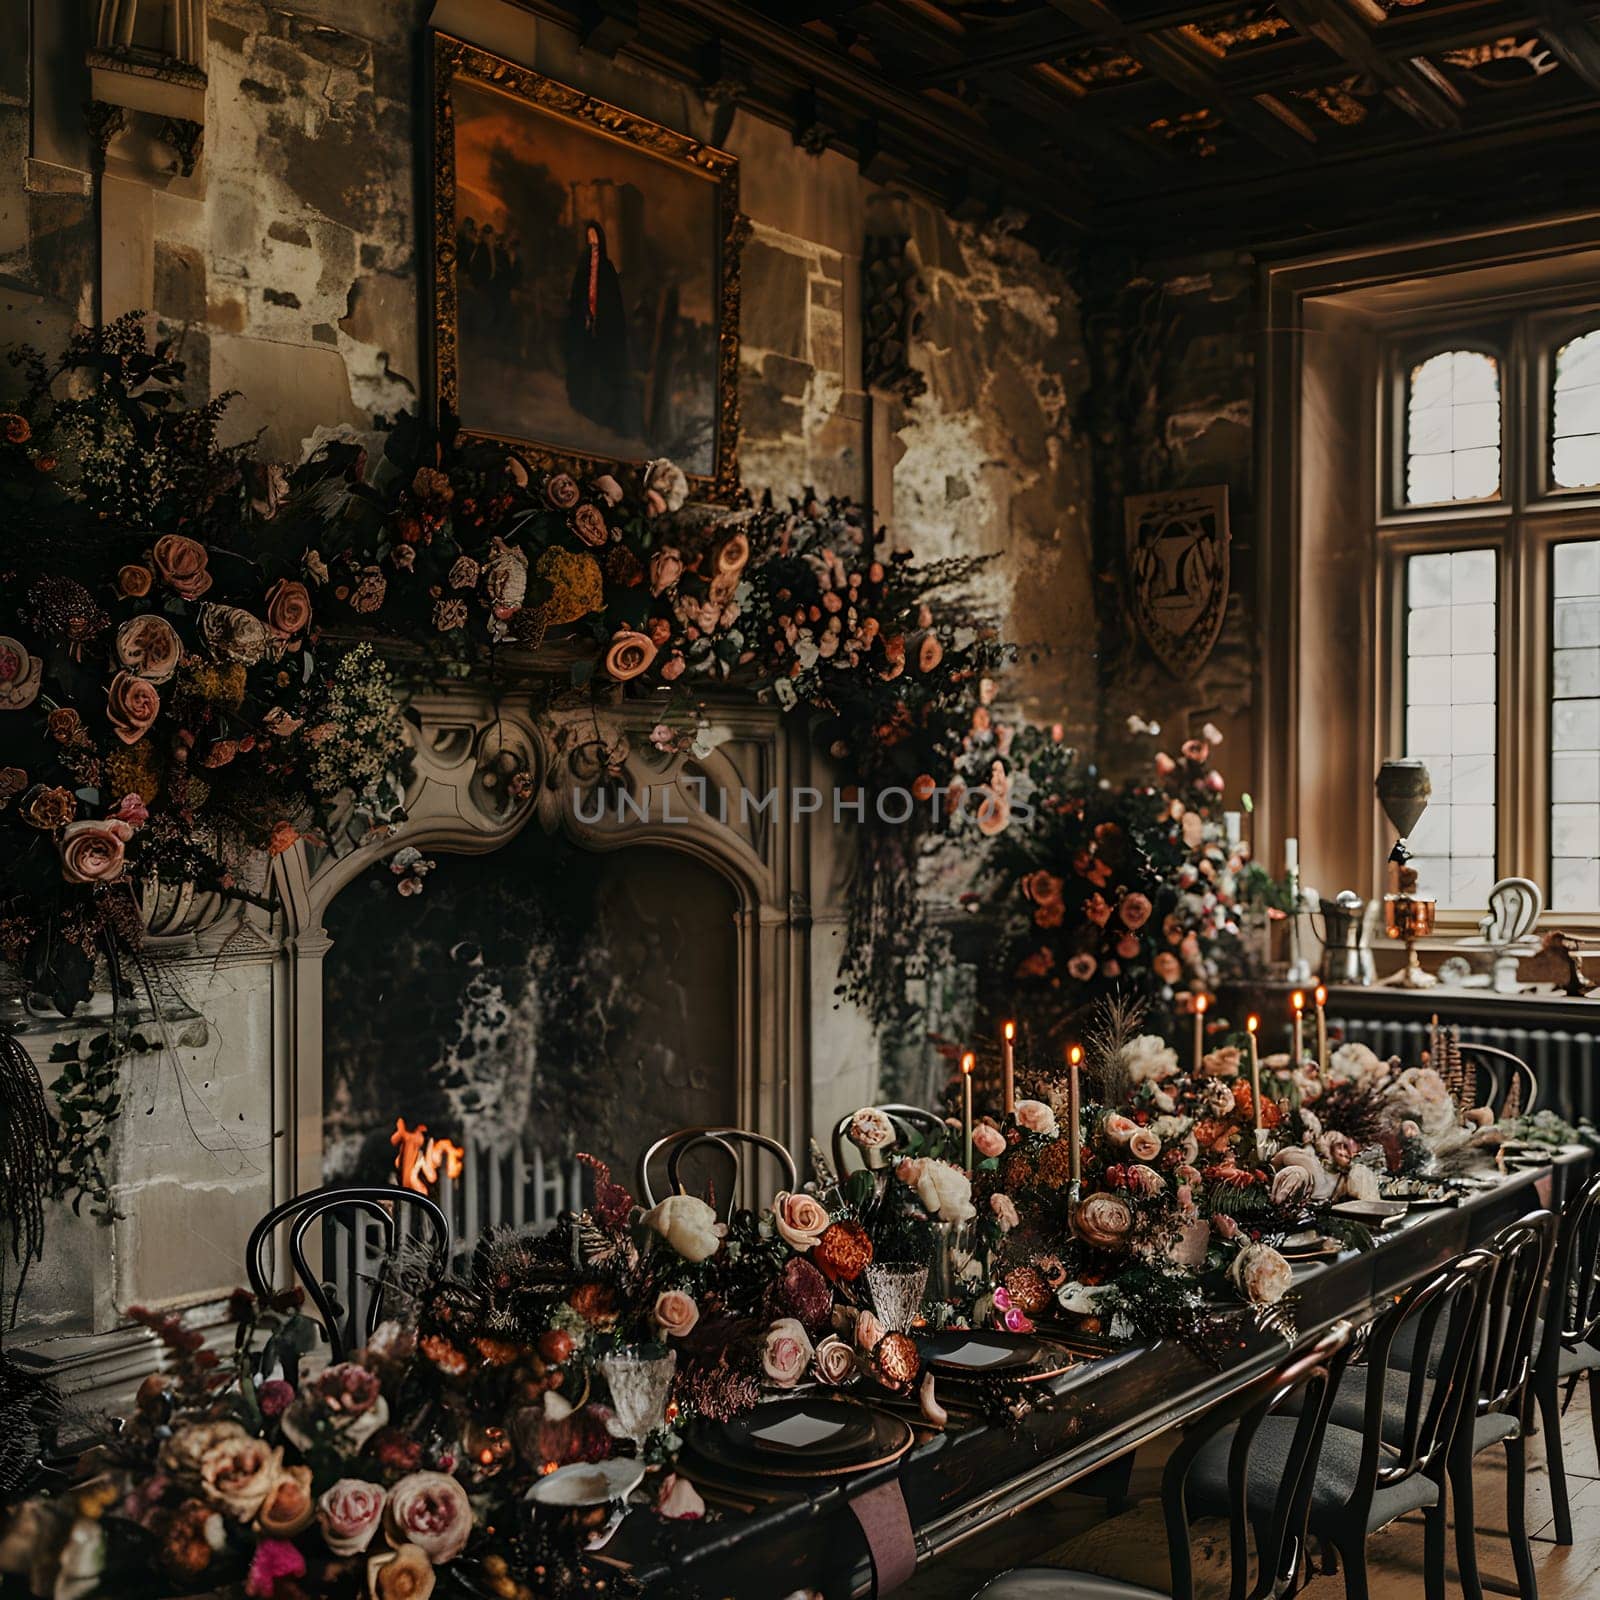 A long table adorned with candles and flowers is set in front of a cozy fireplace, creating a picturesque still life scene in the rooms interior design